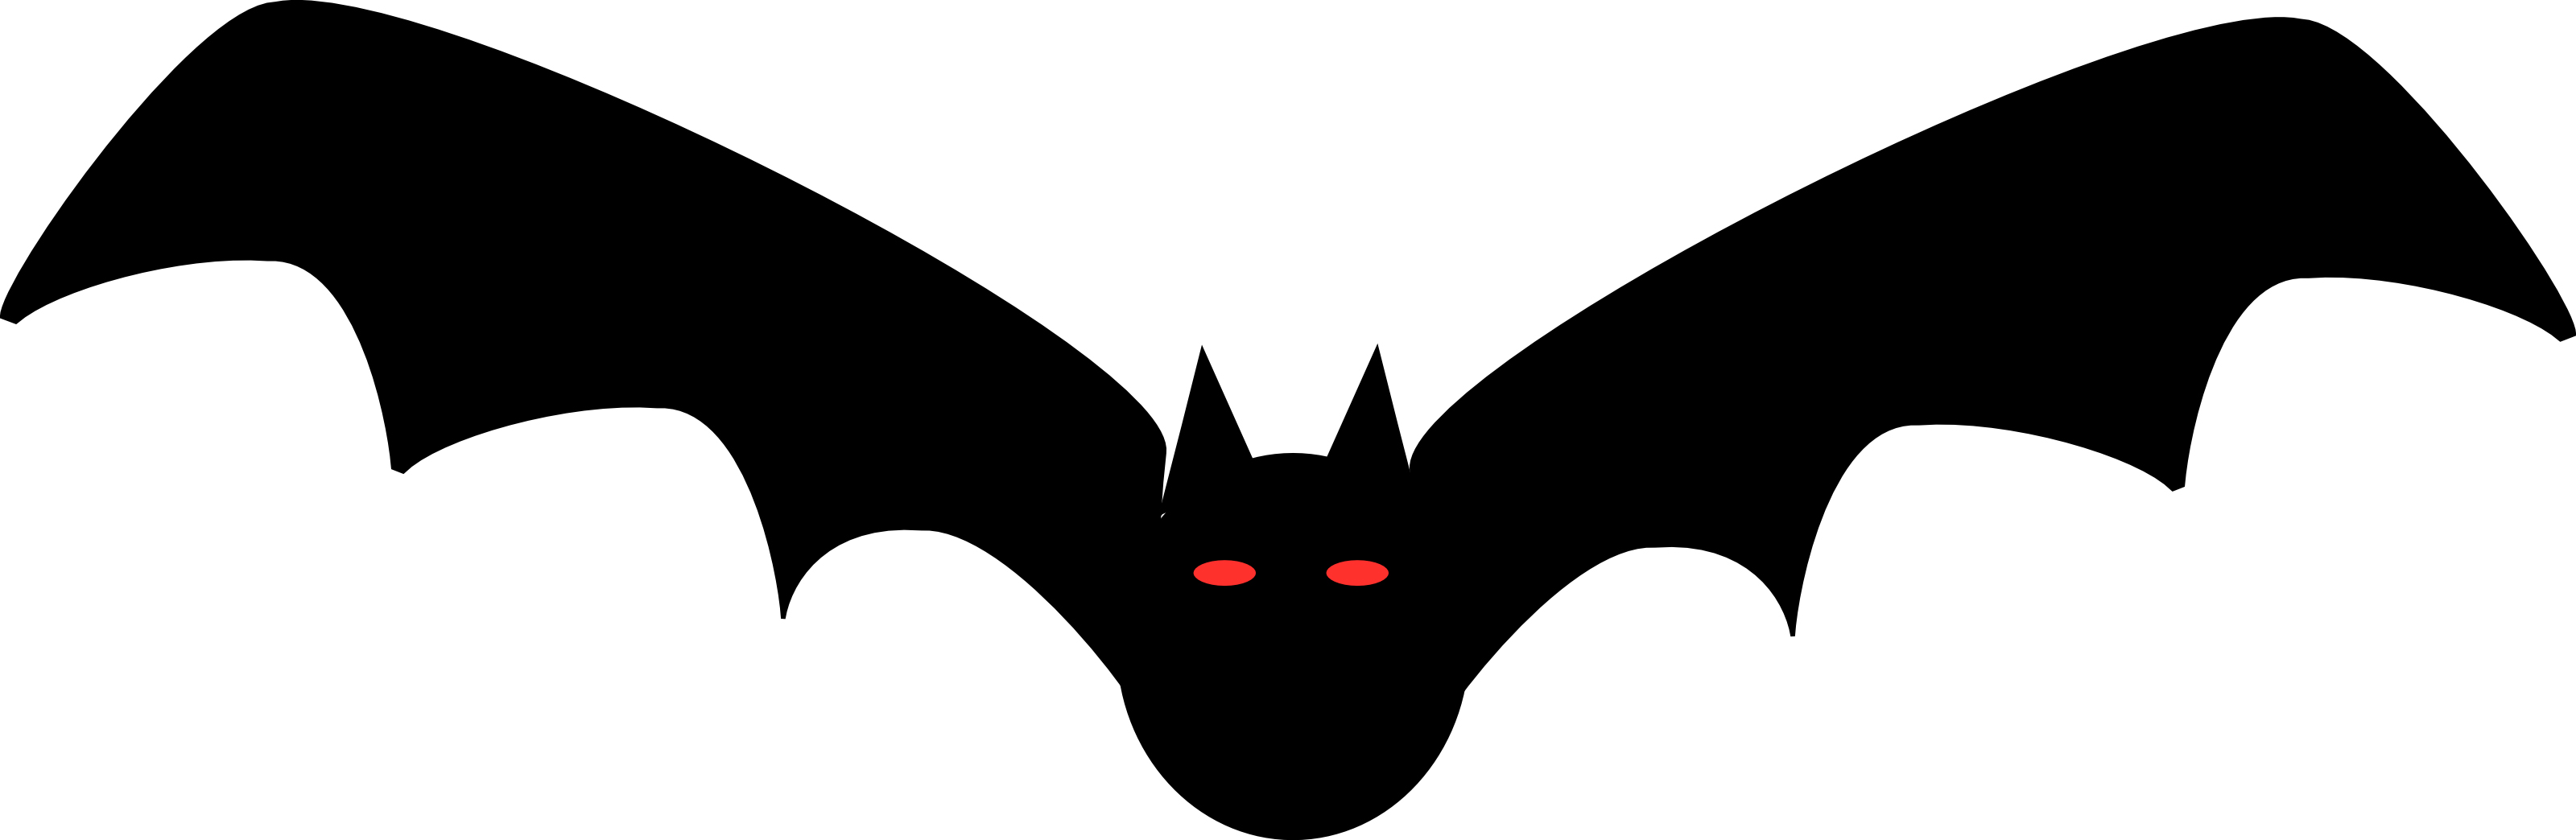 Free bat clip art drawings and colorful images 2 image #7828